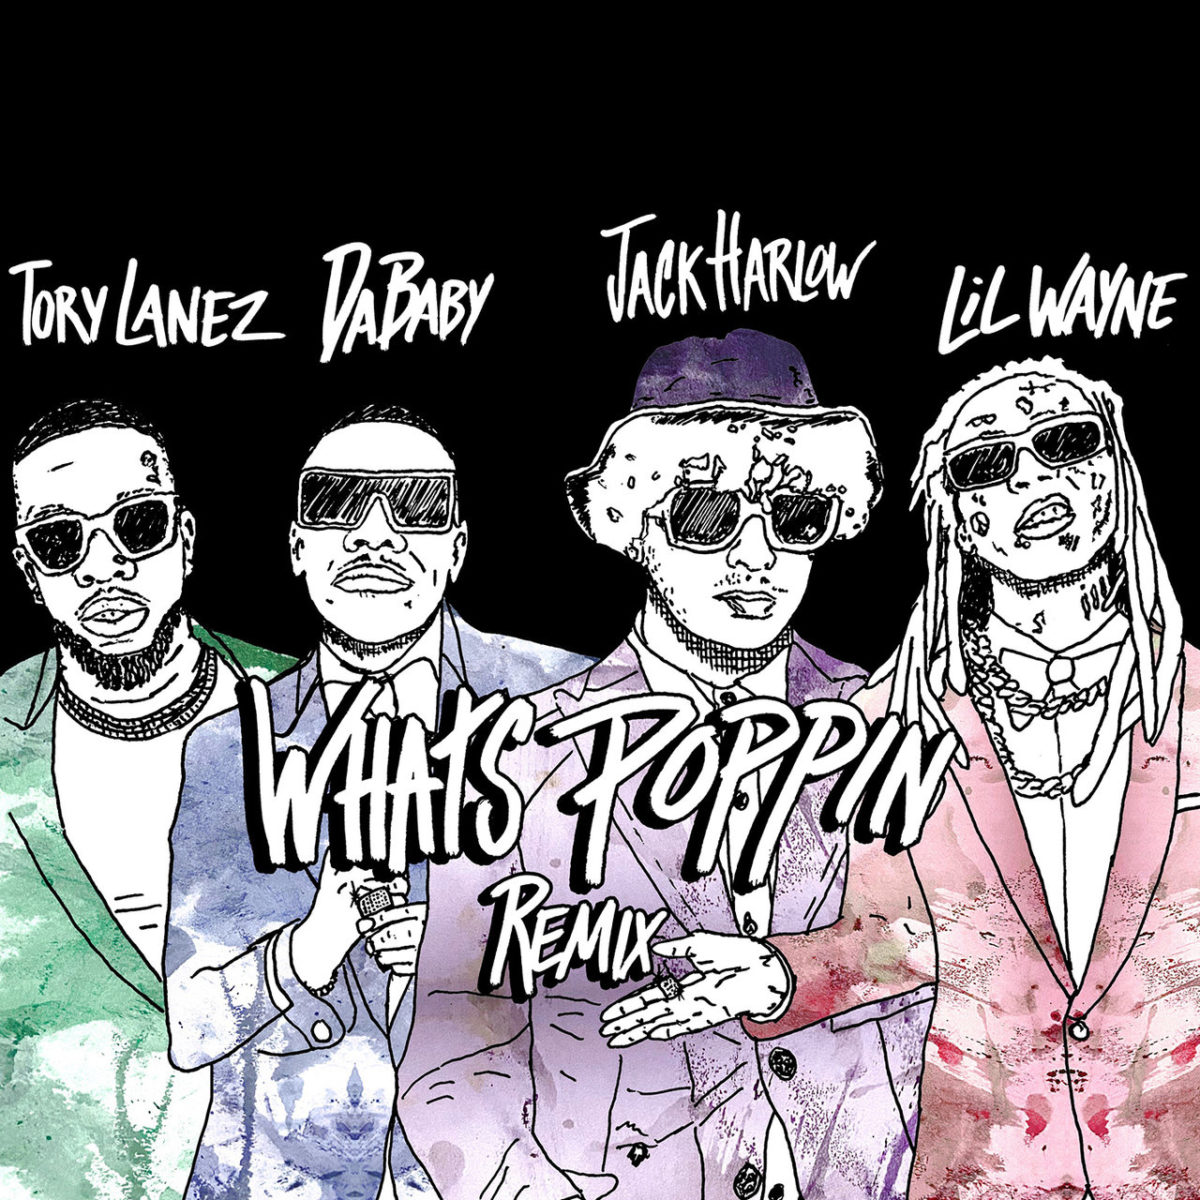 Jack Harlow - Whats Poppin (Remix) (ft. DaBaby, Tory Lanez and Lil Wayne) (Cover)